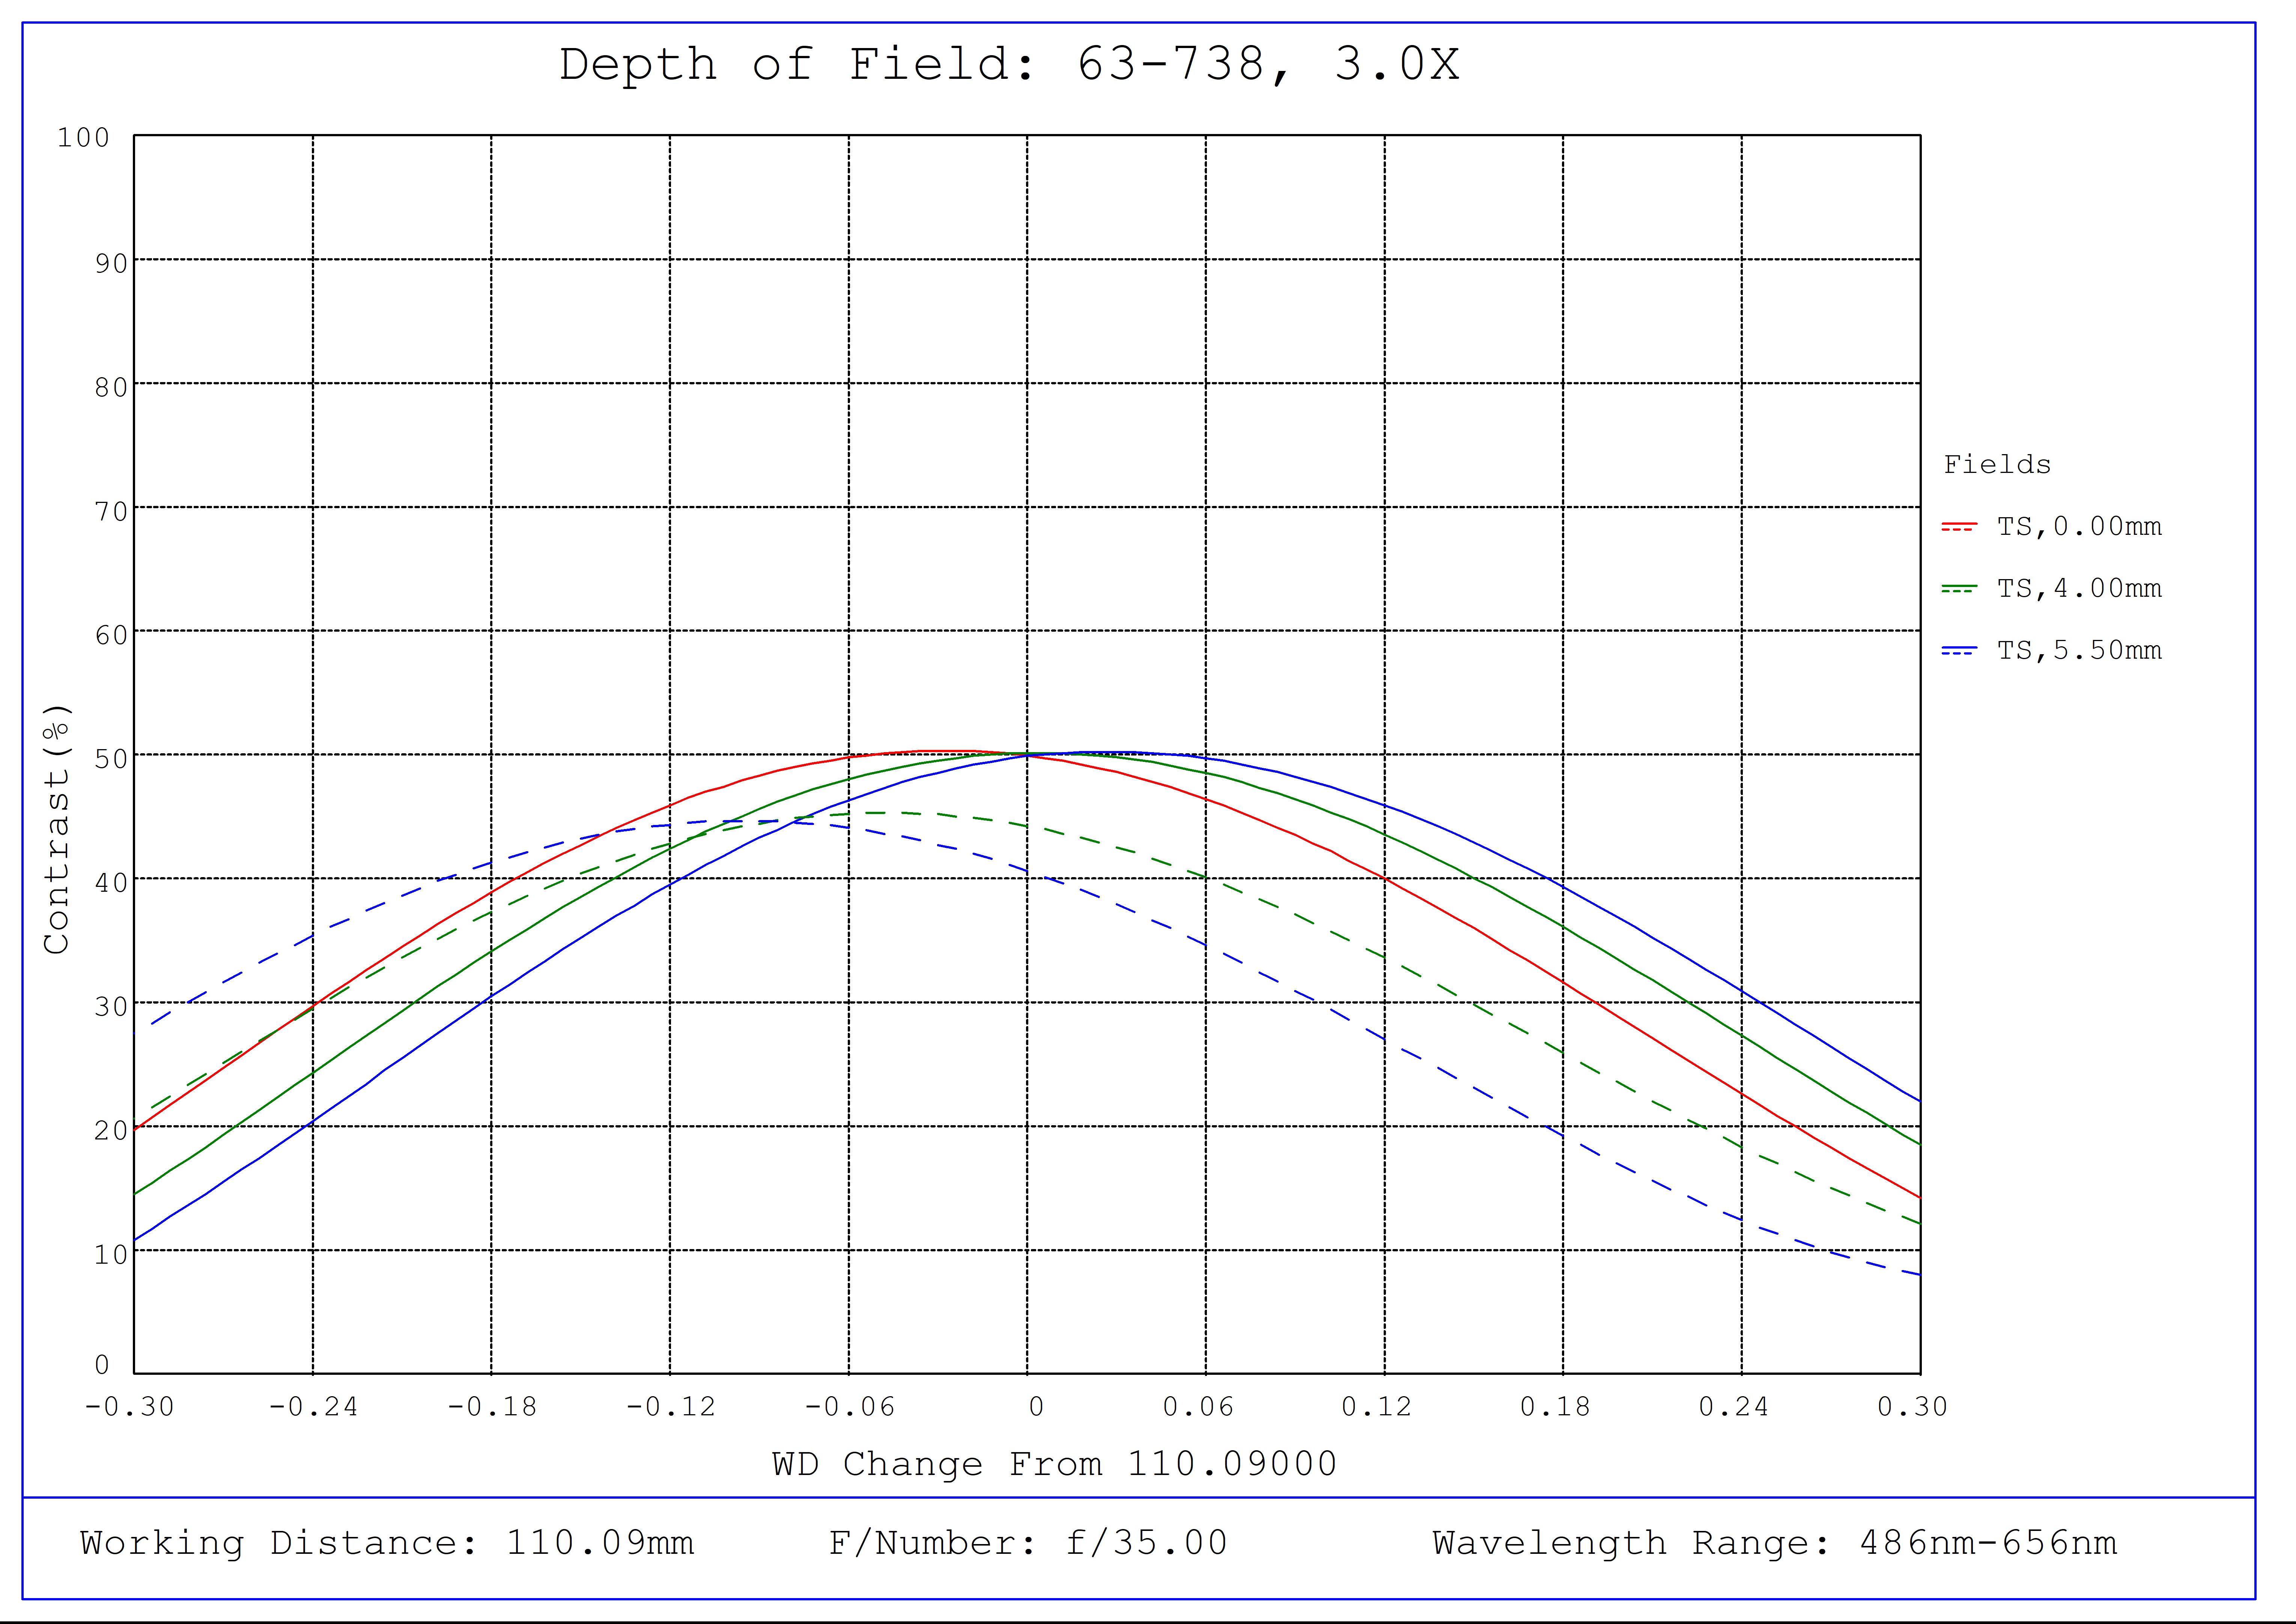 #63-738, 3X, 110mm WD CompactTL™ Telecentric Lens , Depth of Field Plot, 110mm Working Distance, f35